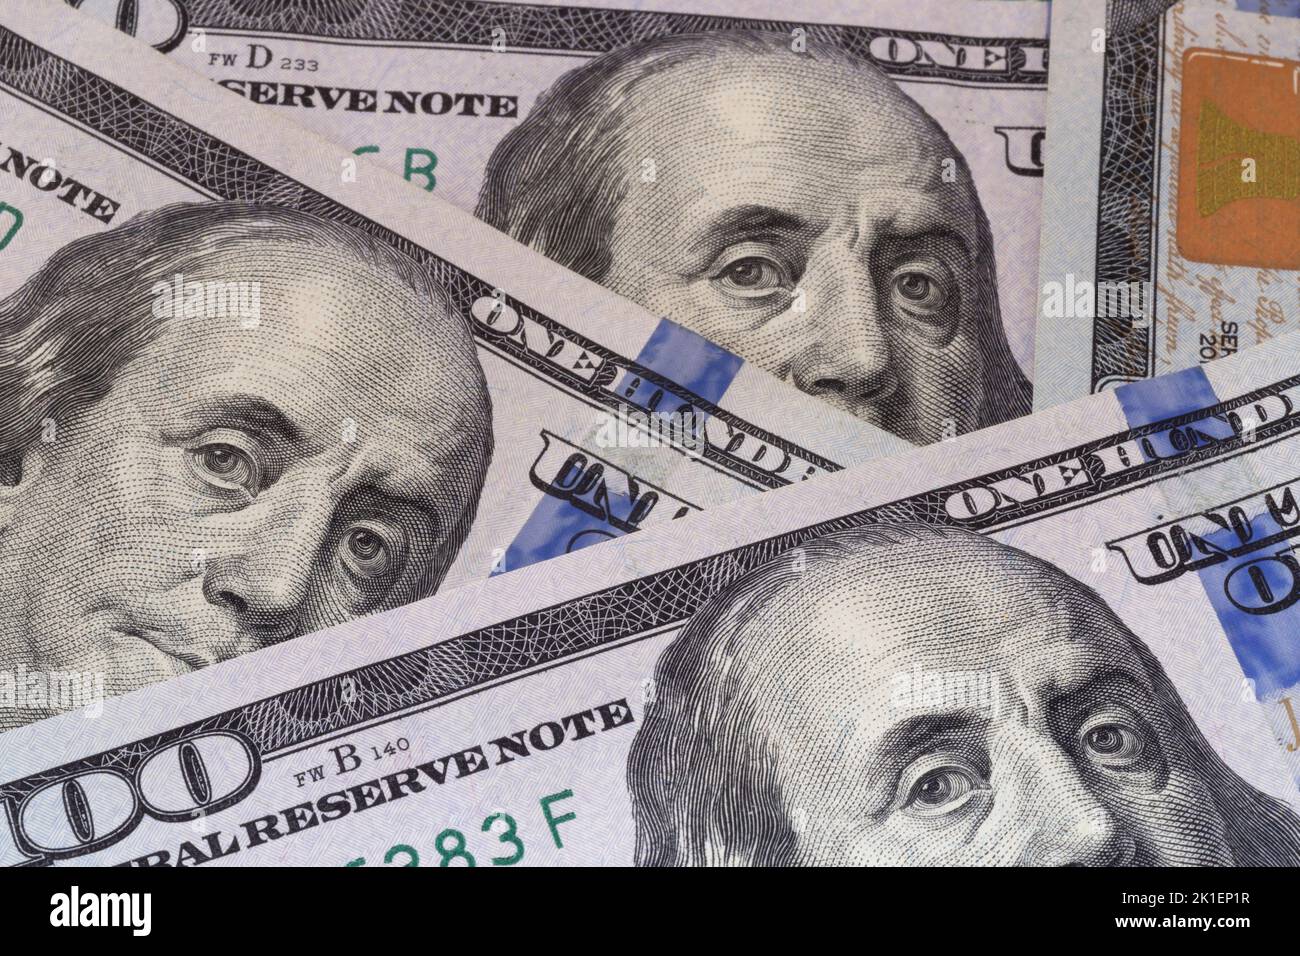 close up of several one hundred United States dollars banknotes Stock Photo